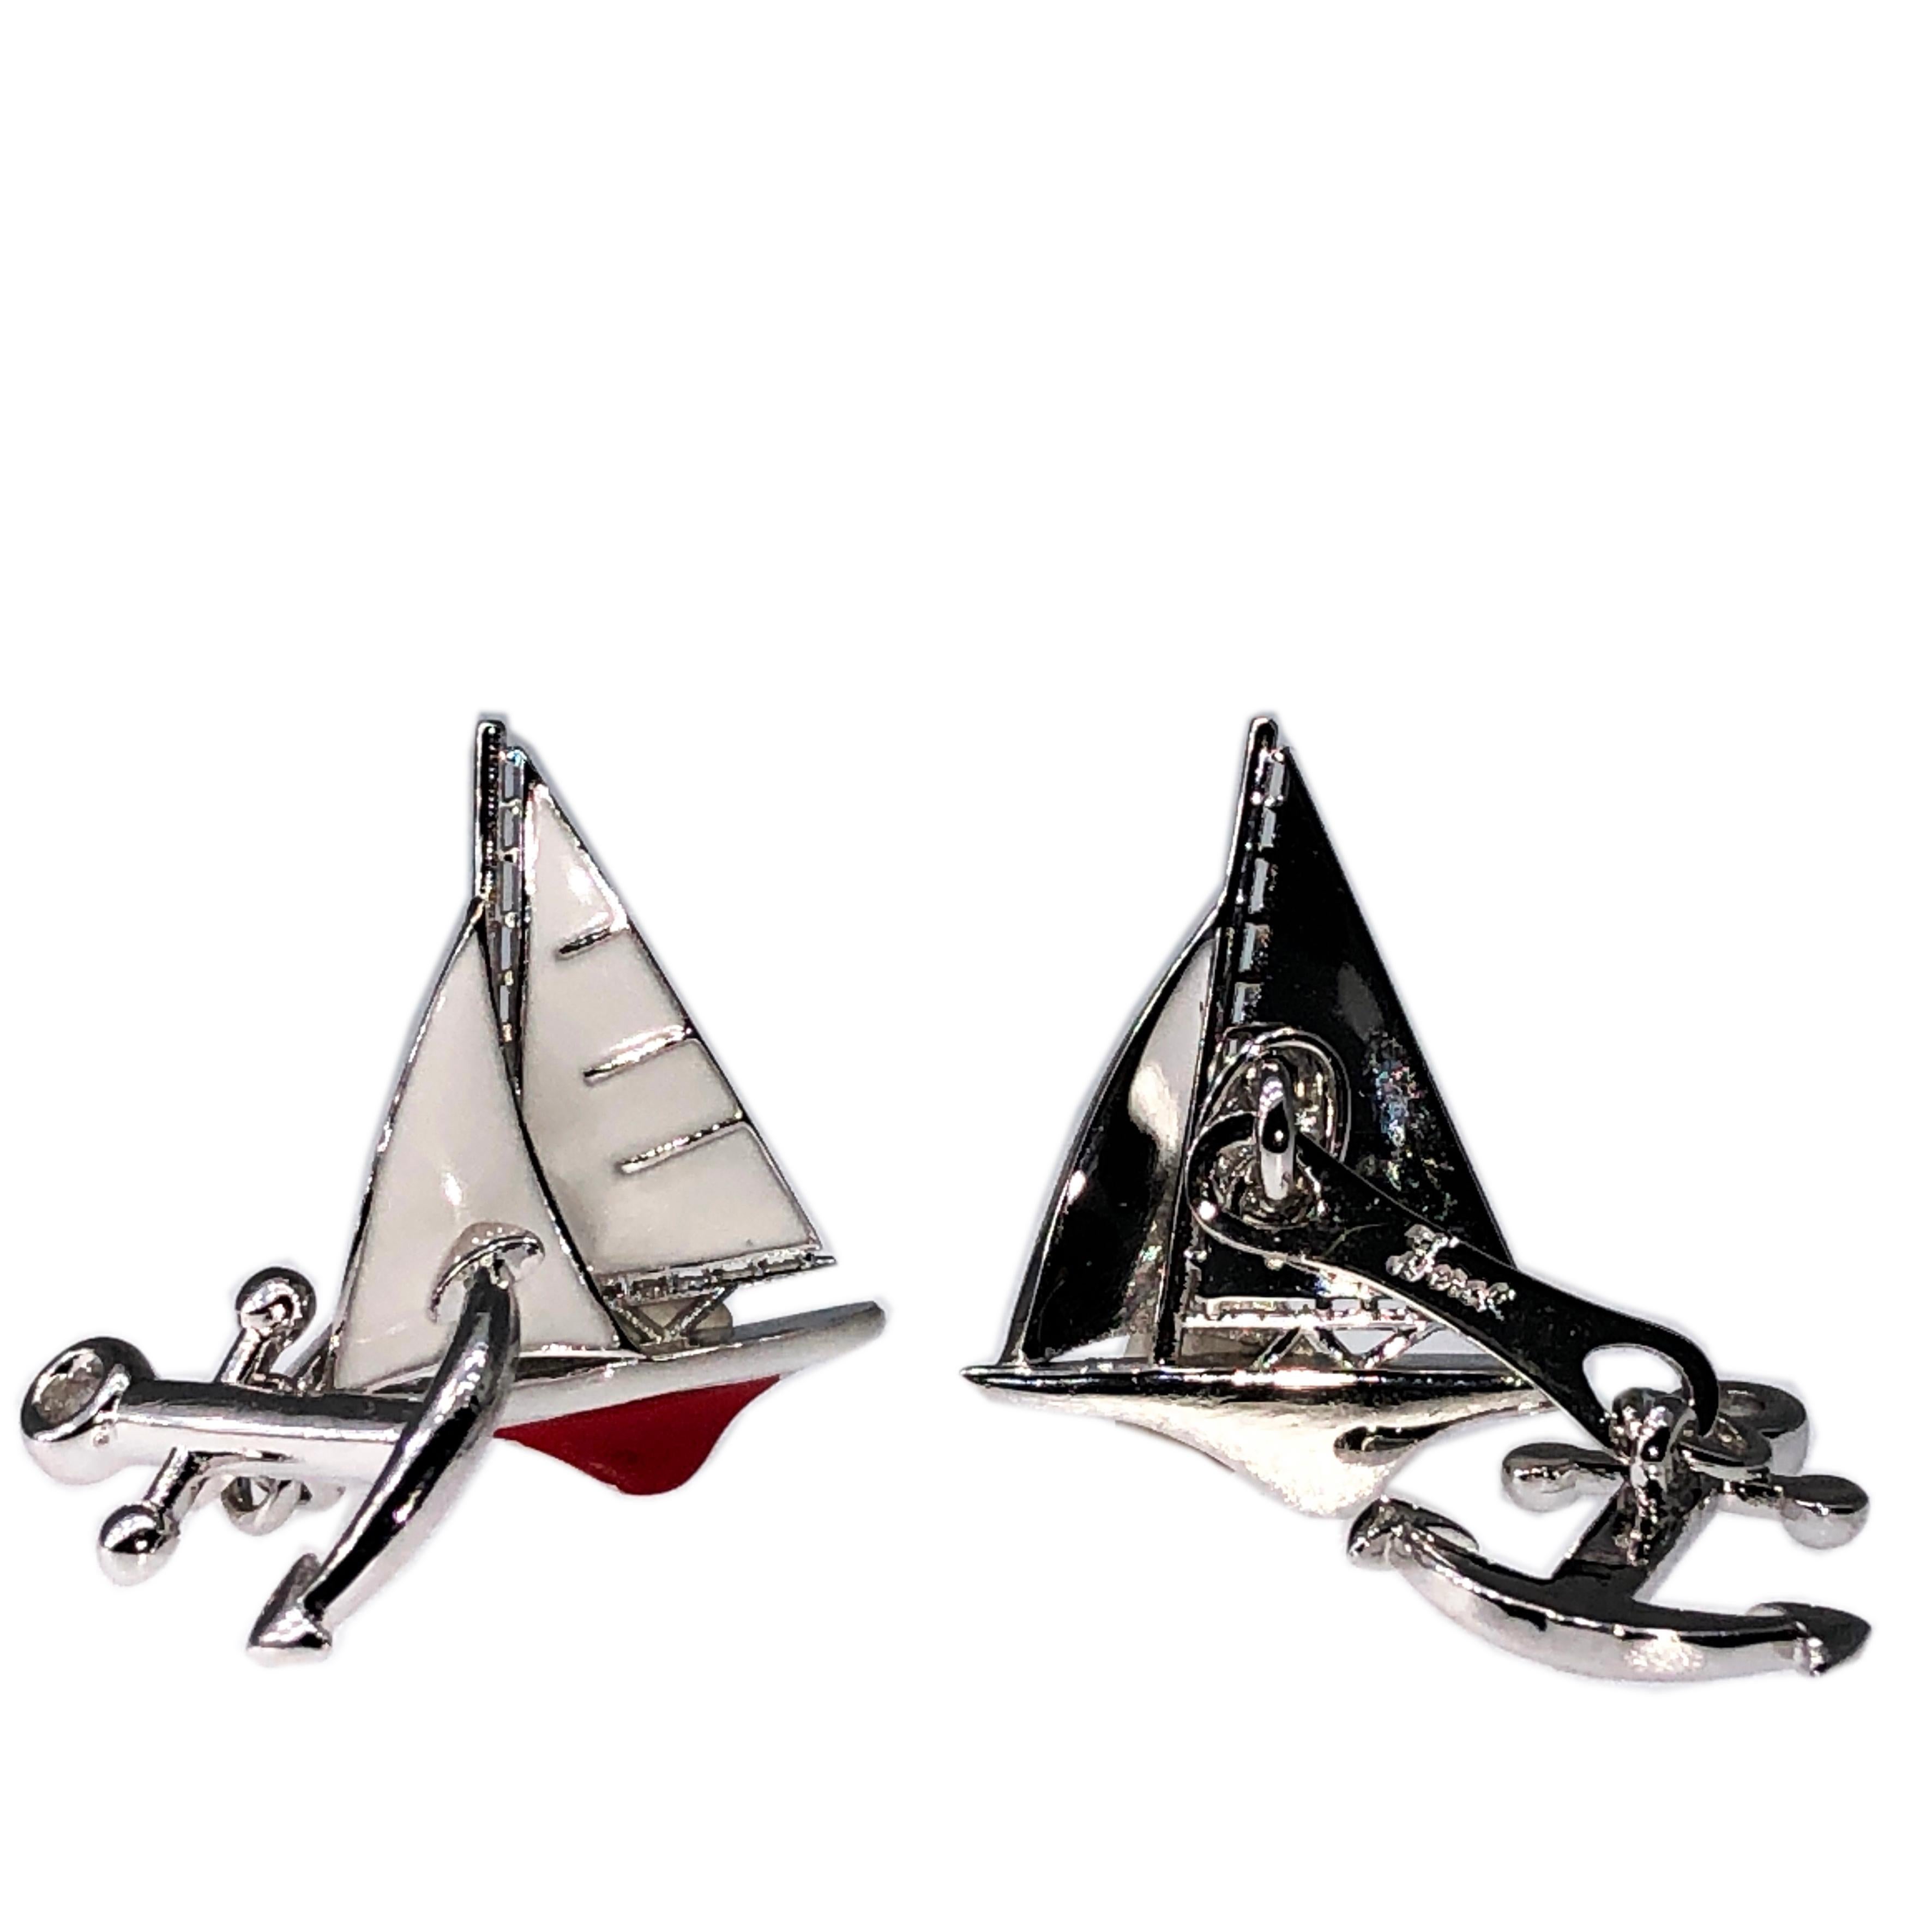 Berca White Red Sailing Boat Shaped Little Anchor Back Sterling Silver Cufflinks For Sale 3